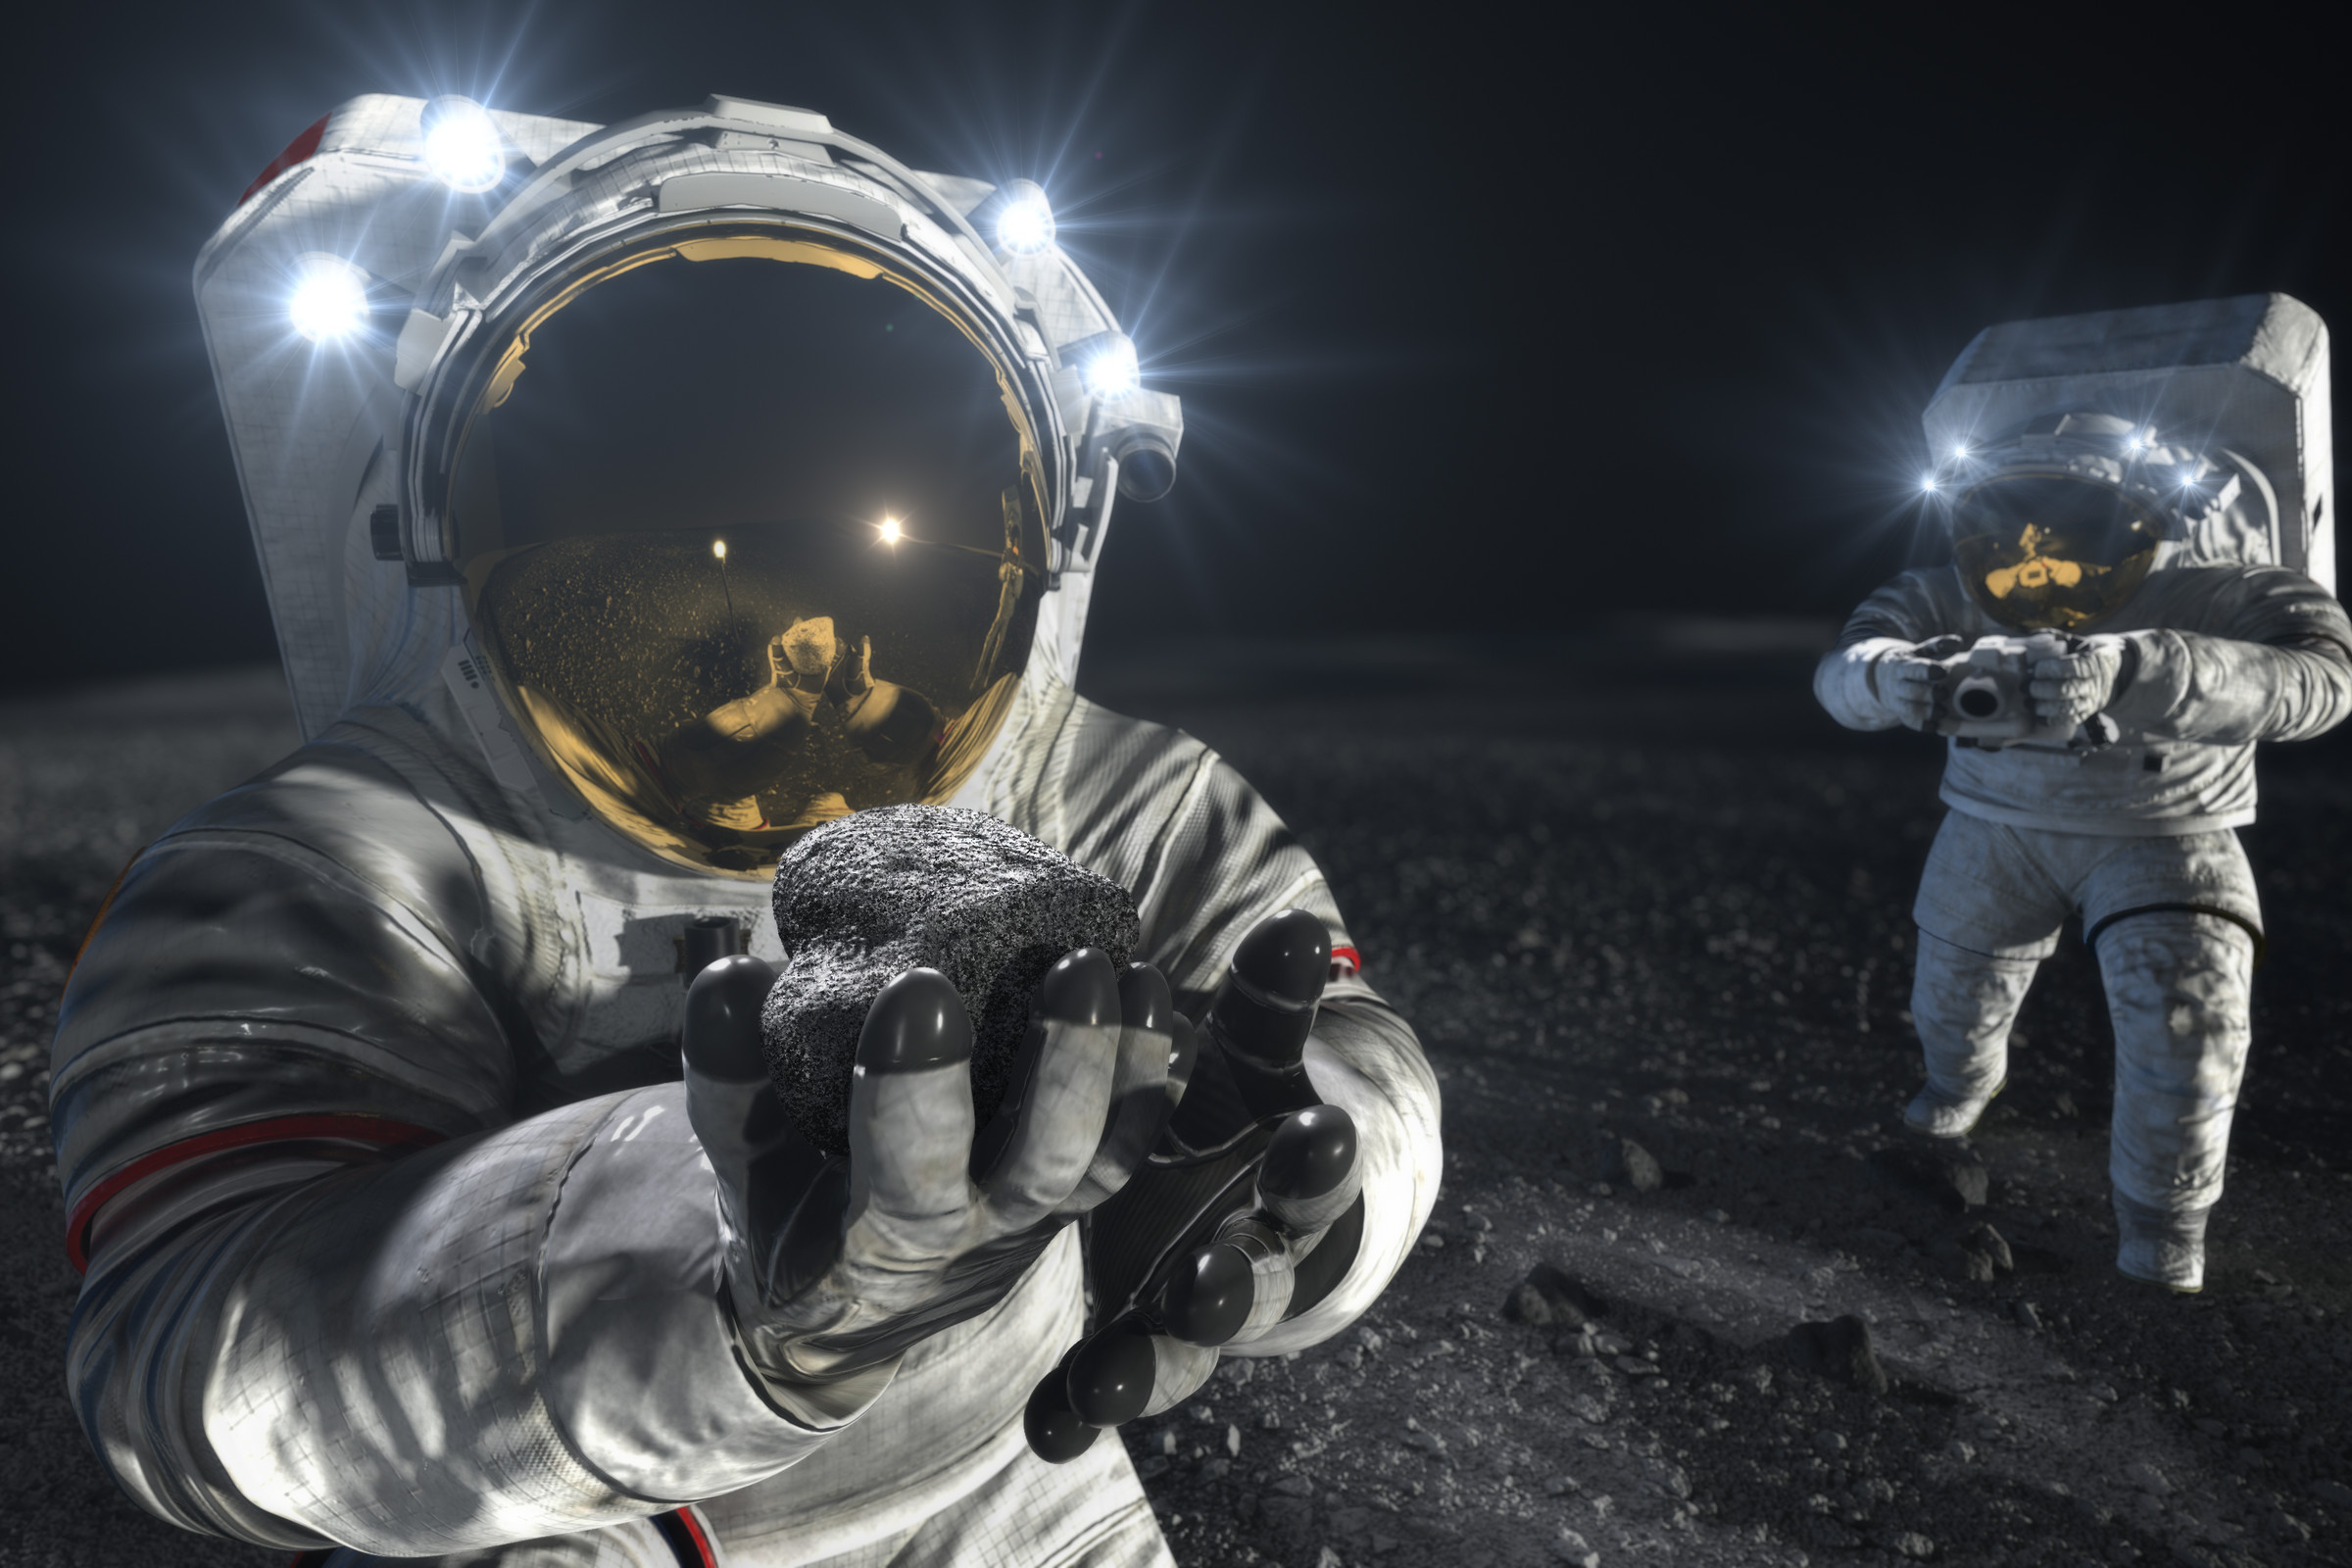 An artistic rendering of astronauts wearing next-generation spacesuits on the Moon.